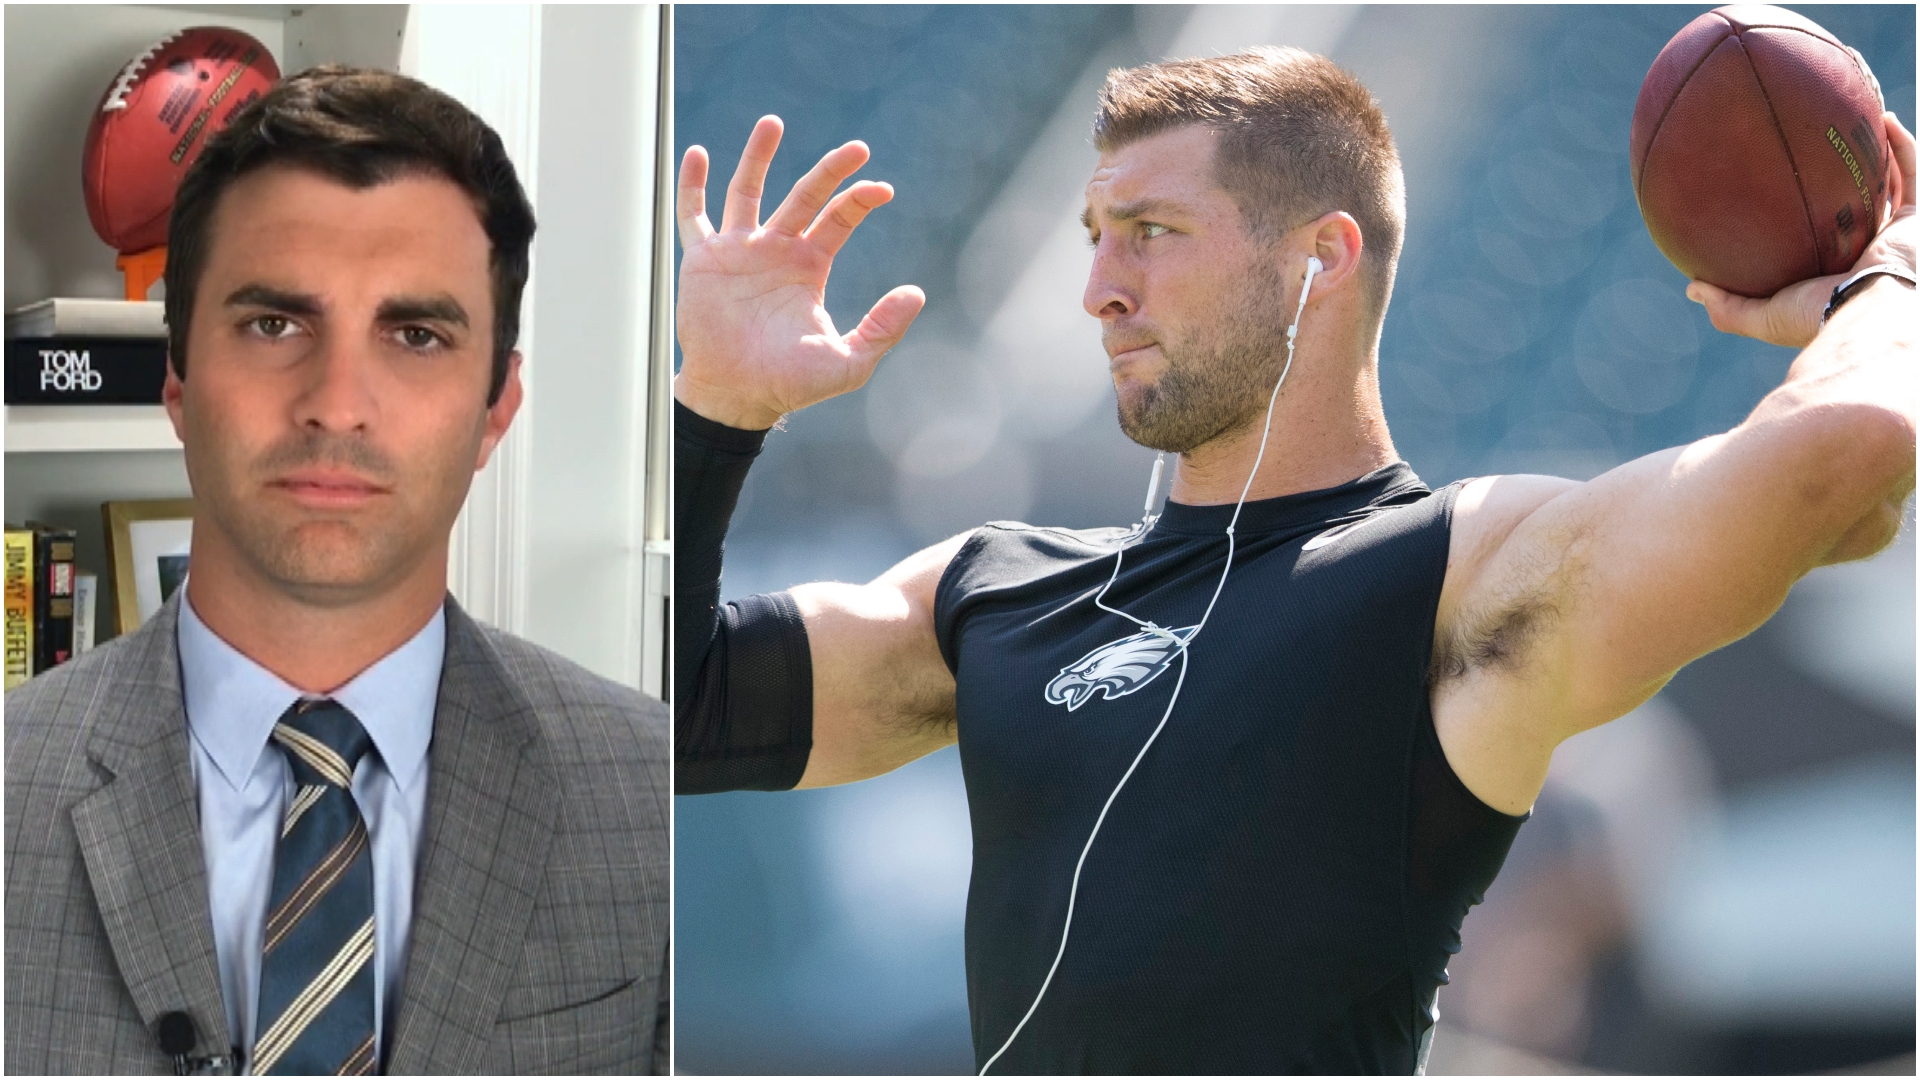 Darlington: Not everyone in Jags organization thrilled with Tebow signing